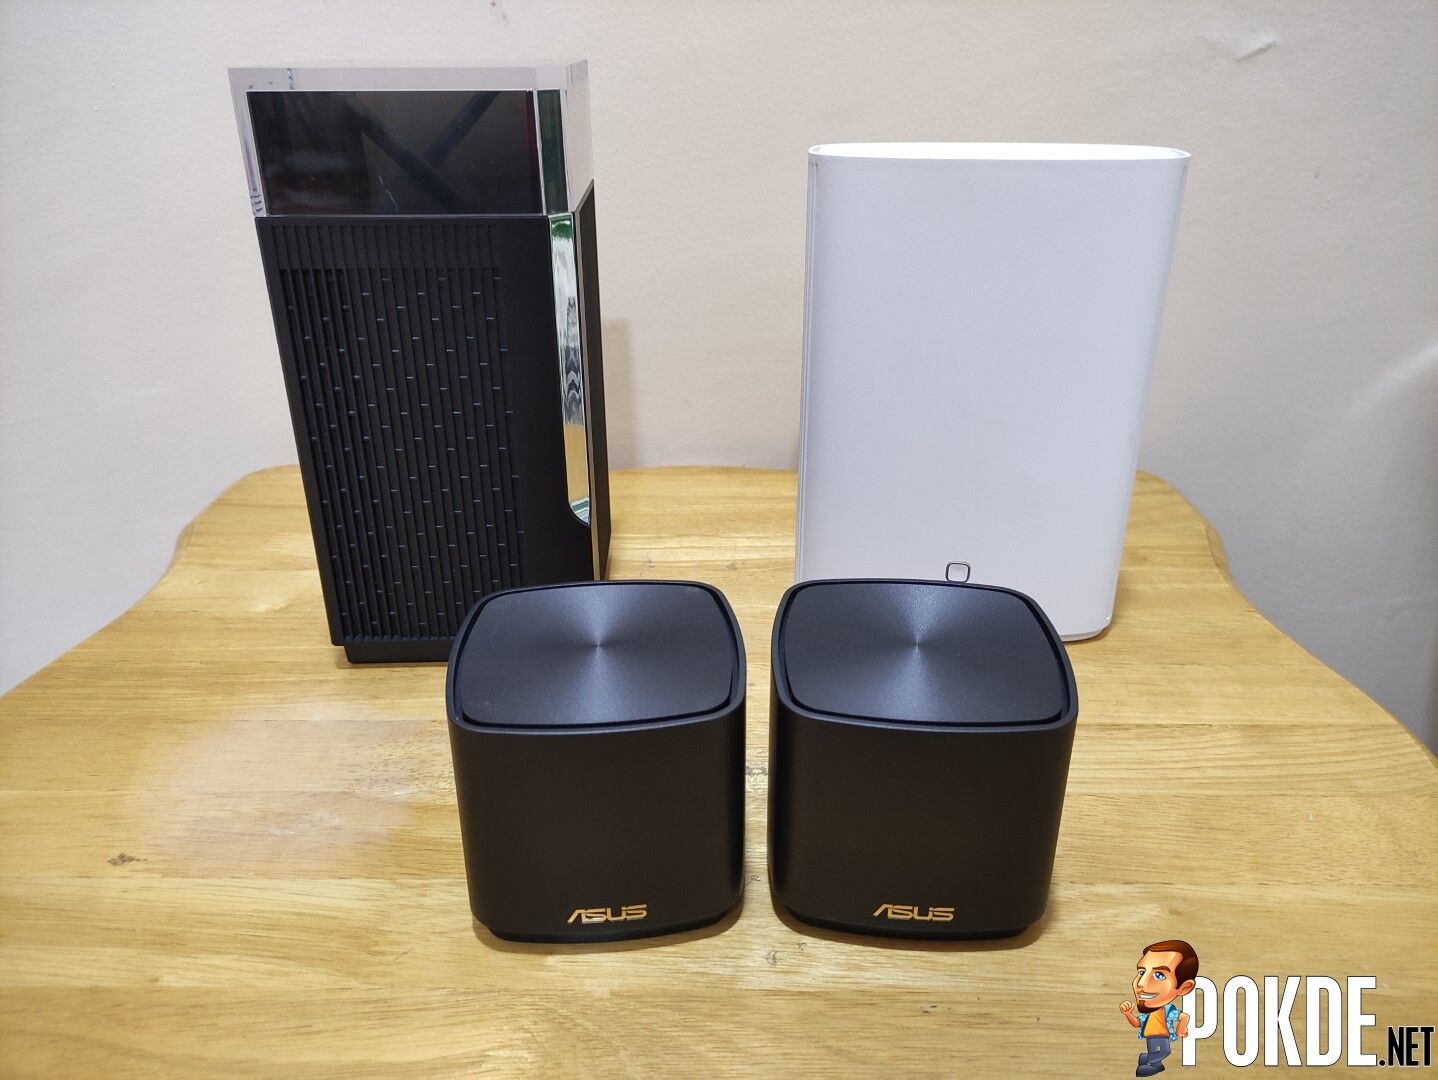 ASUS ZenWiFi AX Mini (XD4) Review - Cute and Small Mesh WiFi 6 System 25